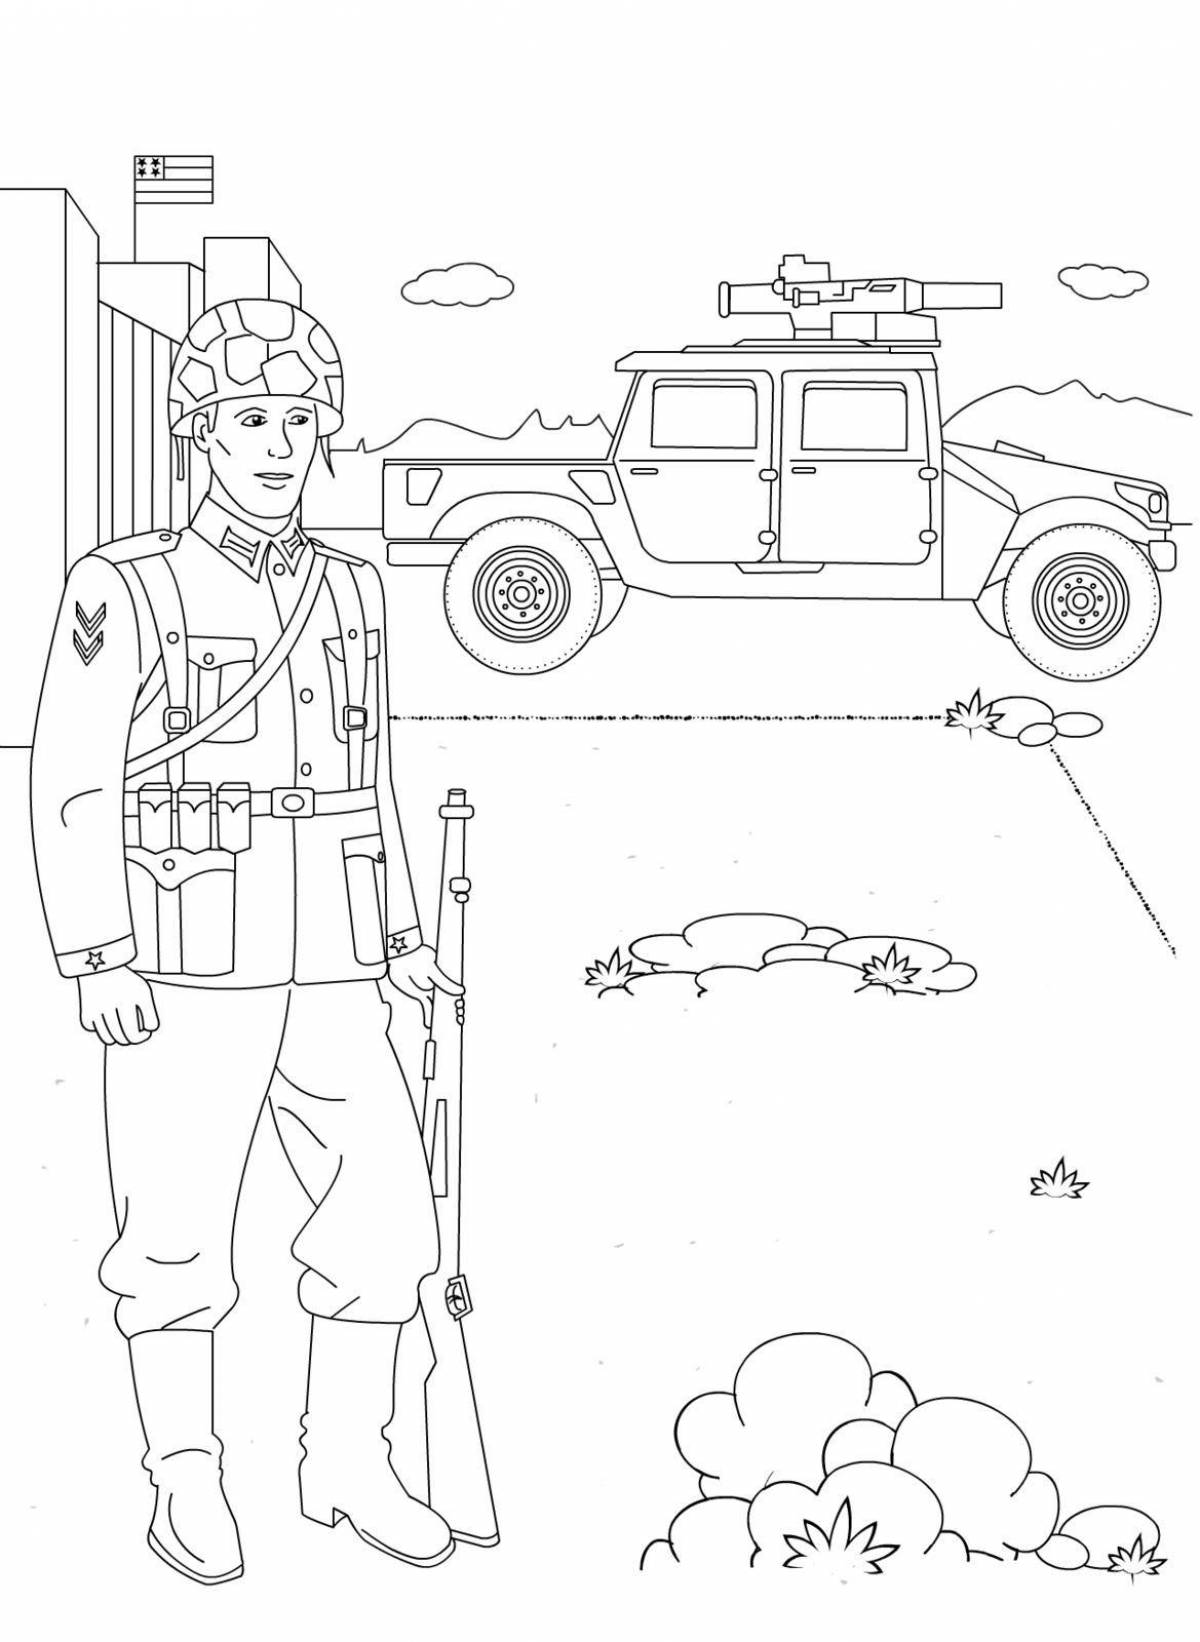 Joyful soldier and children's coloring book